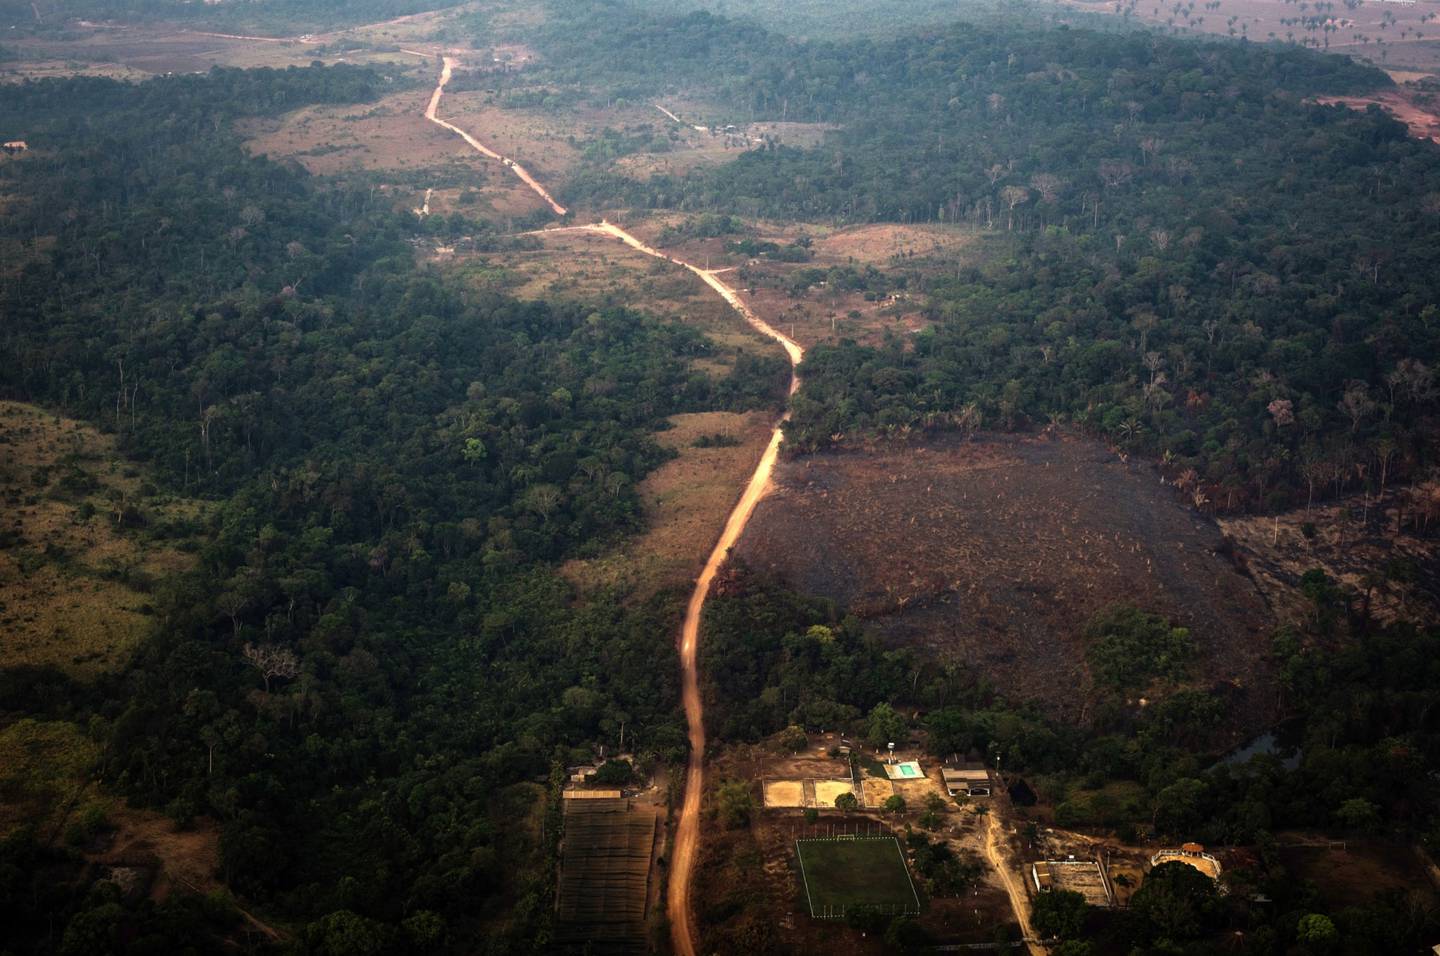 Land destroyed by fire is divided by a road in this aerial photograph of the Amazon rainforest in Rondonia state, Brazil. Photographer: Leonardo Carrato/Bloomberg